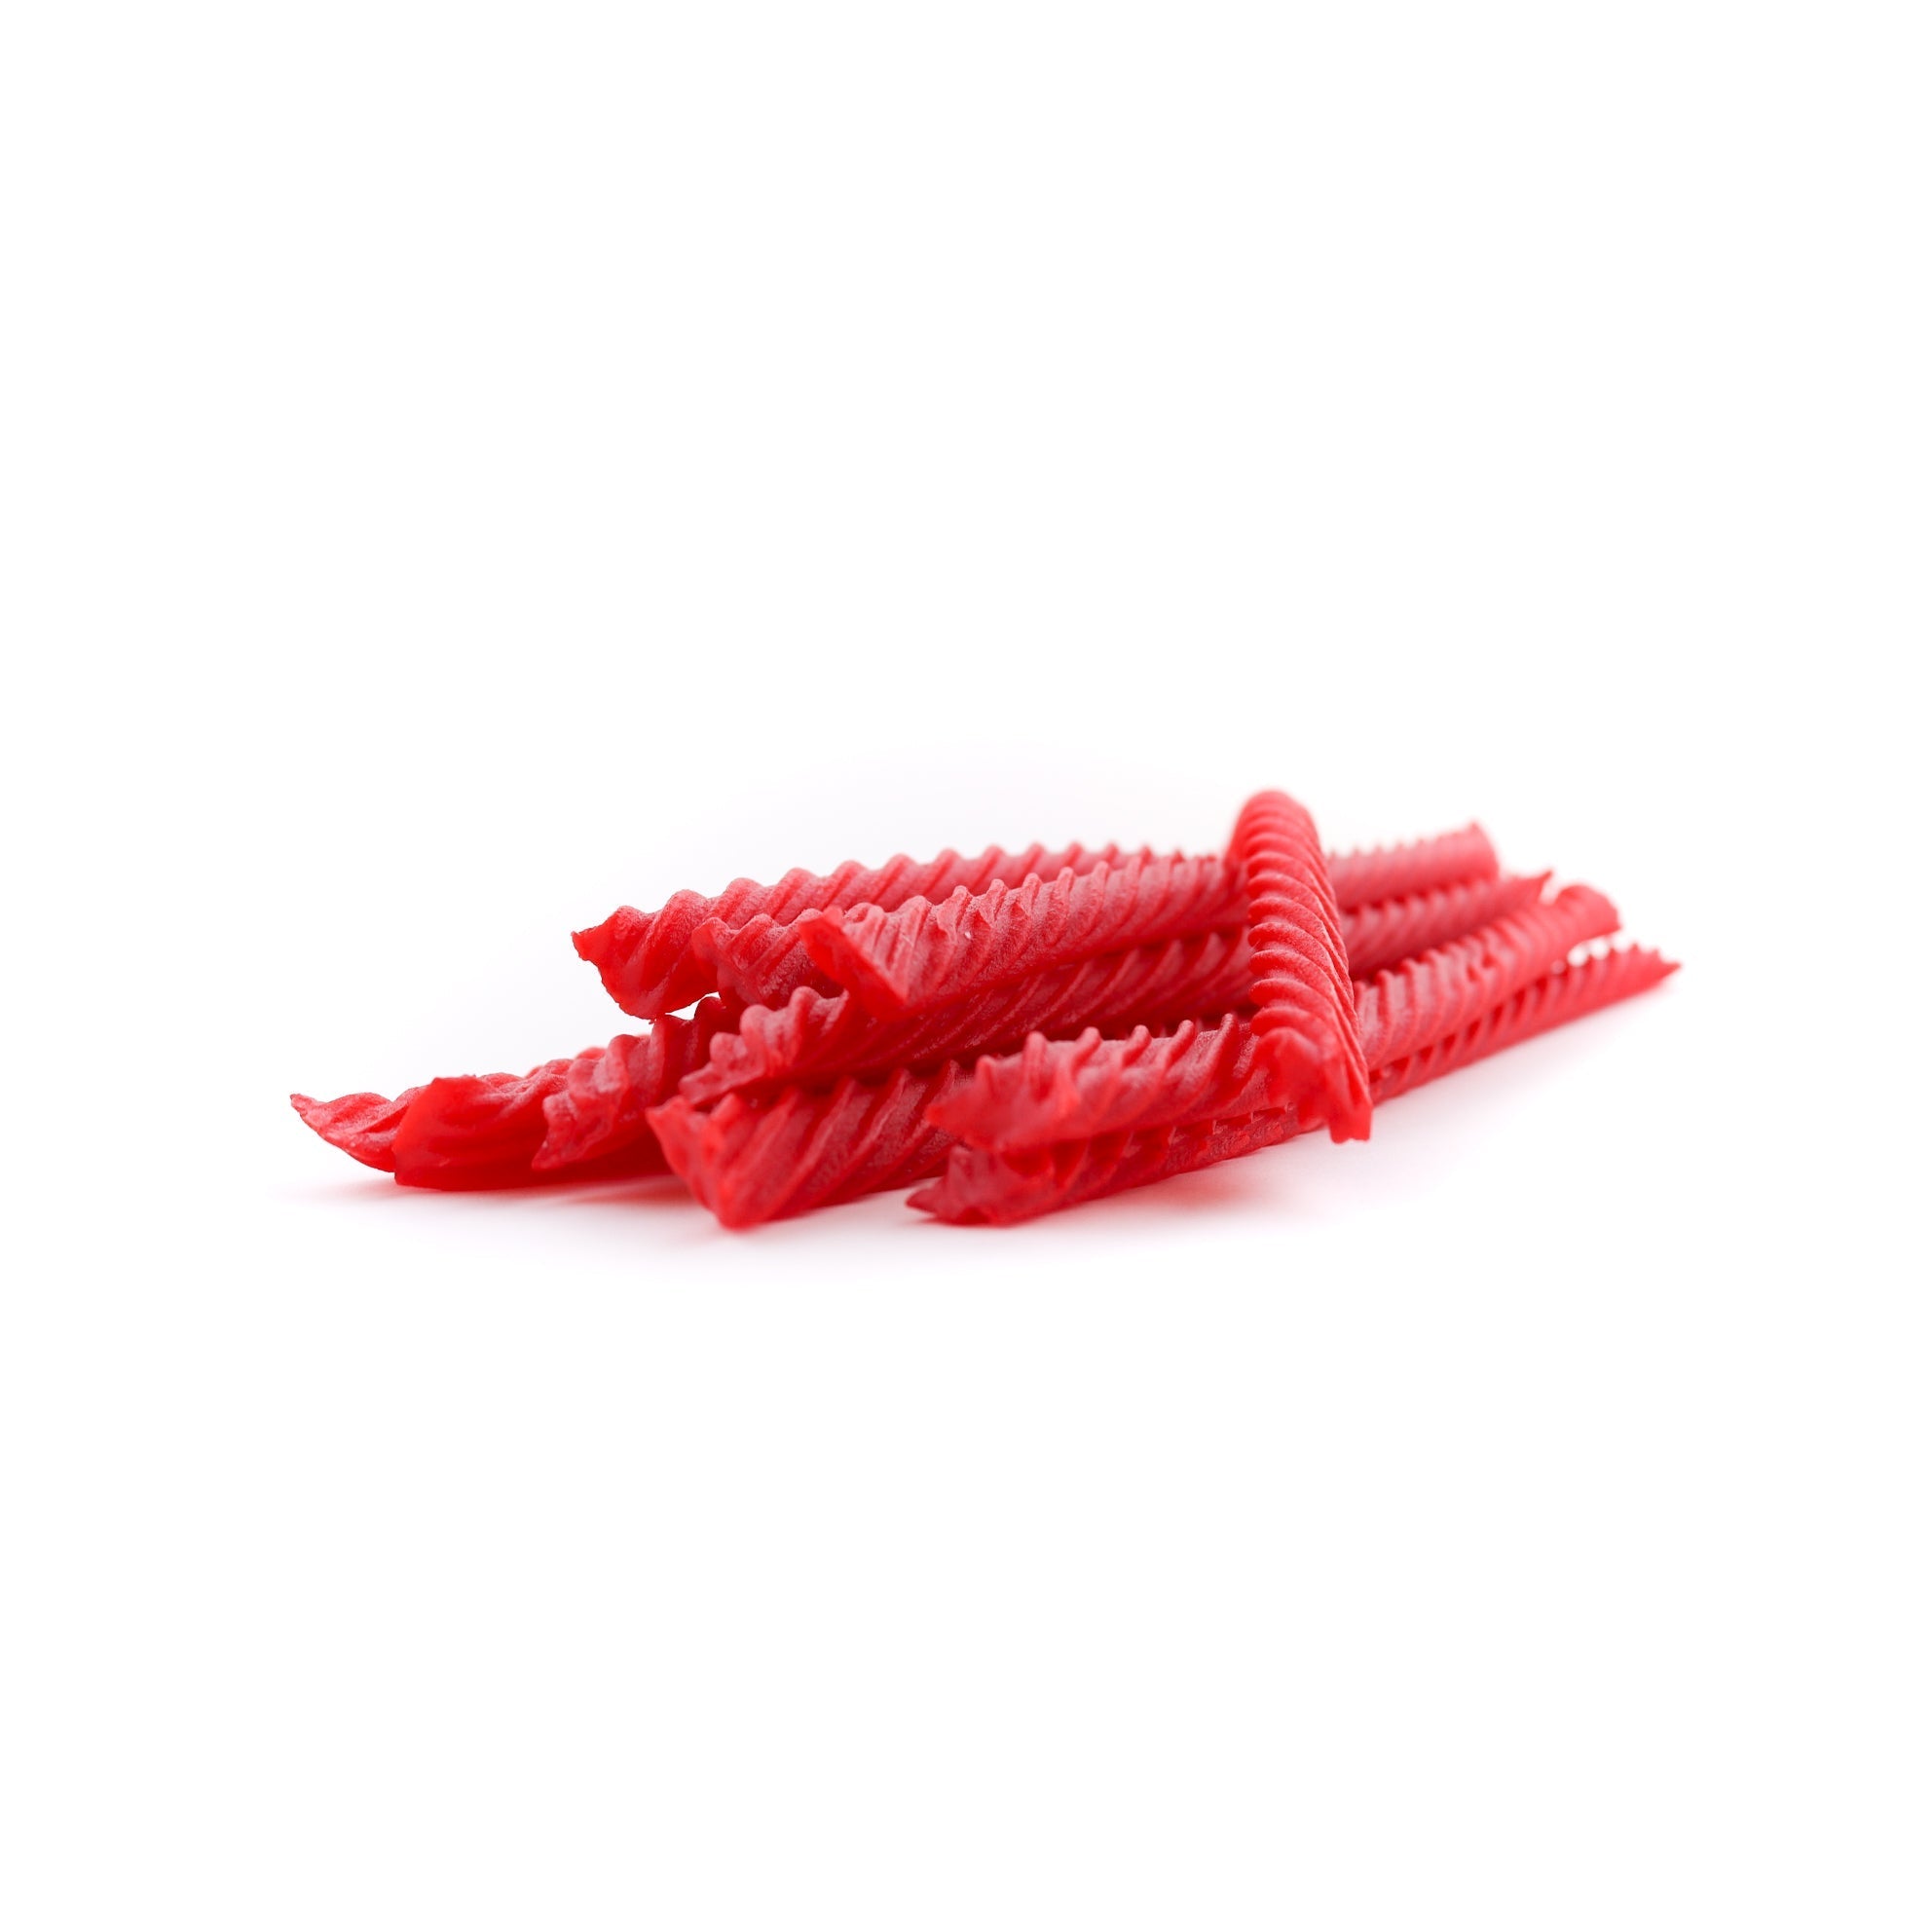 Red Vines Original Red® Chewy Licorice Twists Laydown Bag 14 oz